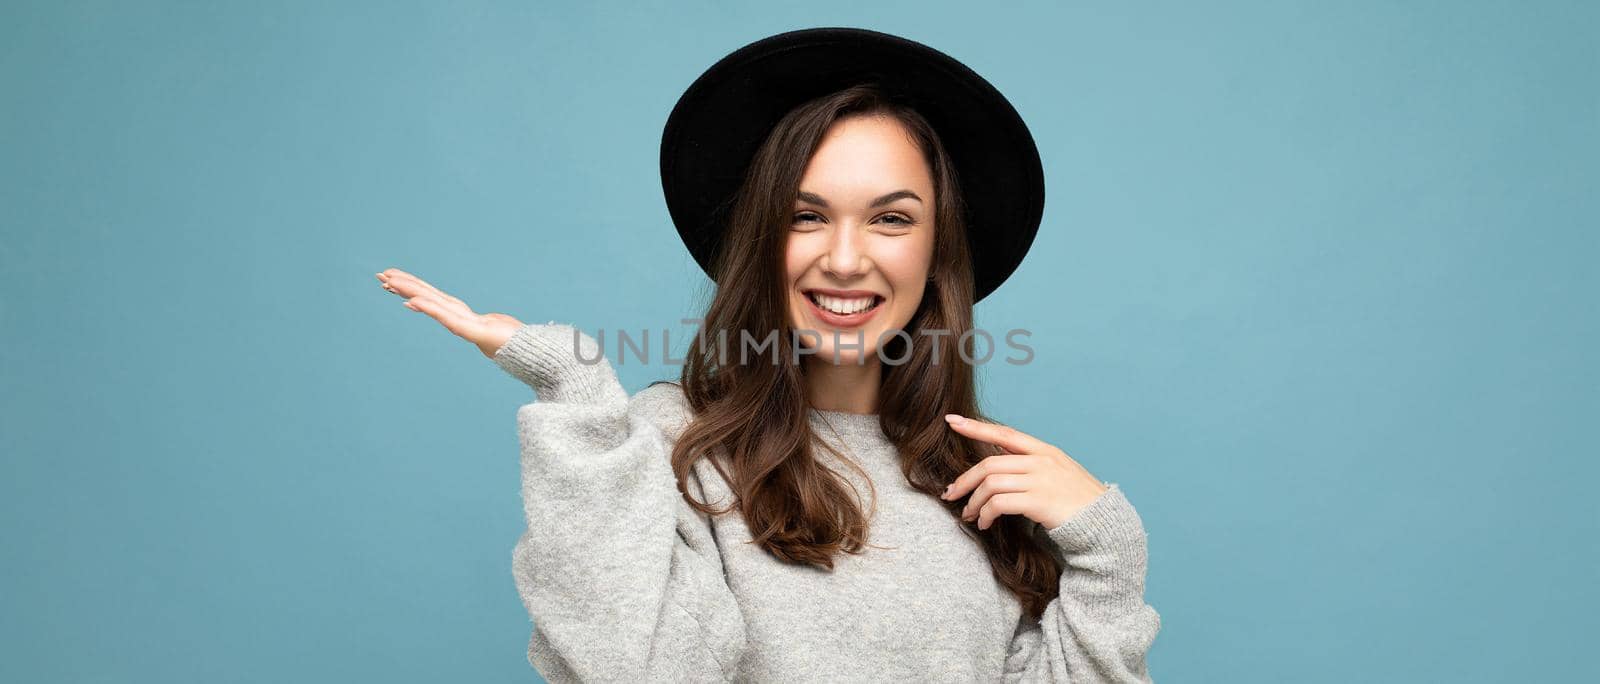 Panoramic photo of attractive brunette happy smiling young woman pointing hand at free space for text wearing grey jersey and black hat isolated on blue background by TRMK